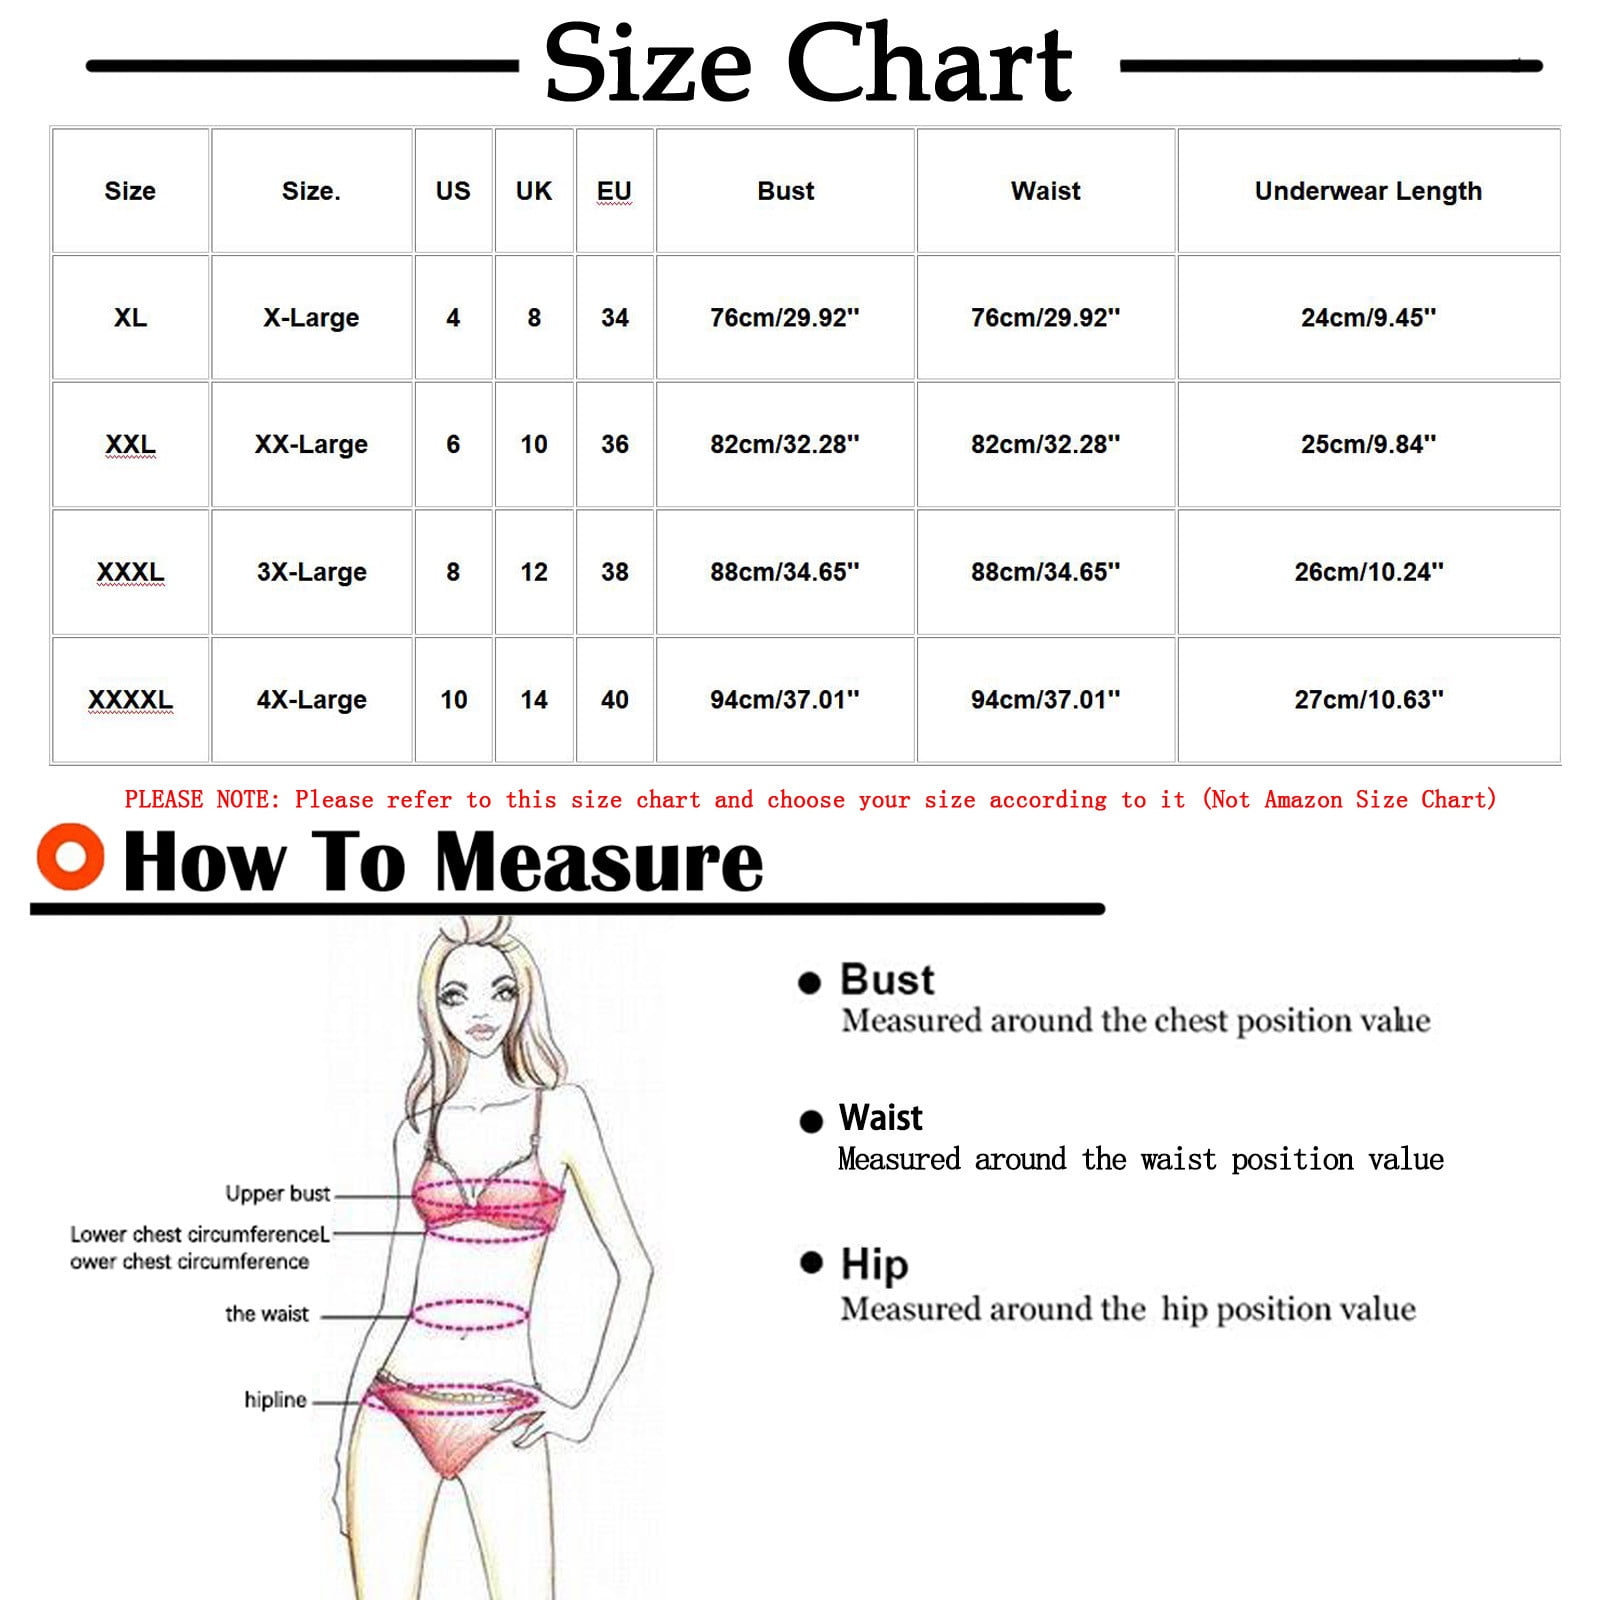 Tarmeek Women's Plus Size Sexy Lingerie Valentines Solid Erotic Lingerie  Sexy Underwear Condole Belt Nightgown Lace Deep V Sexy Suit Teddy Babydoll